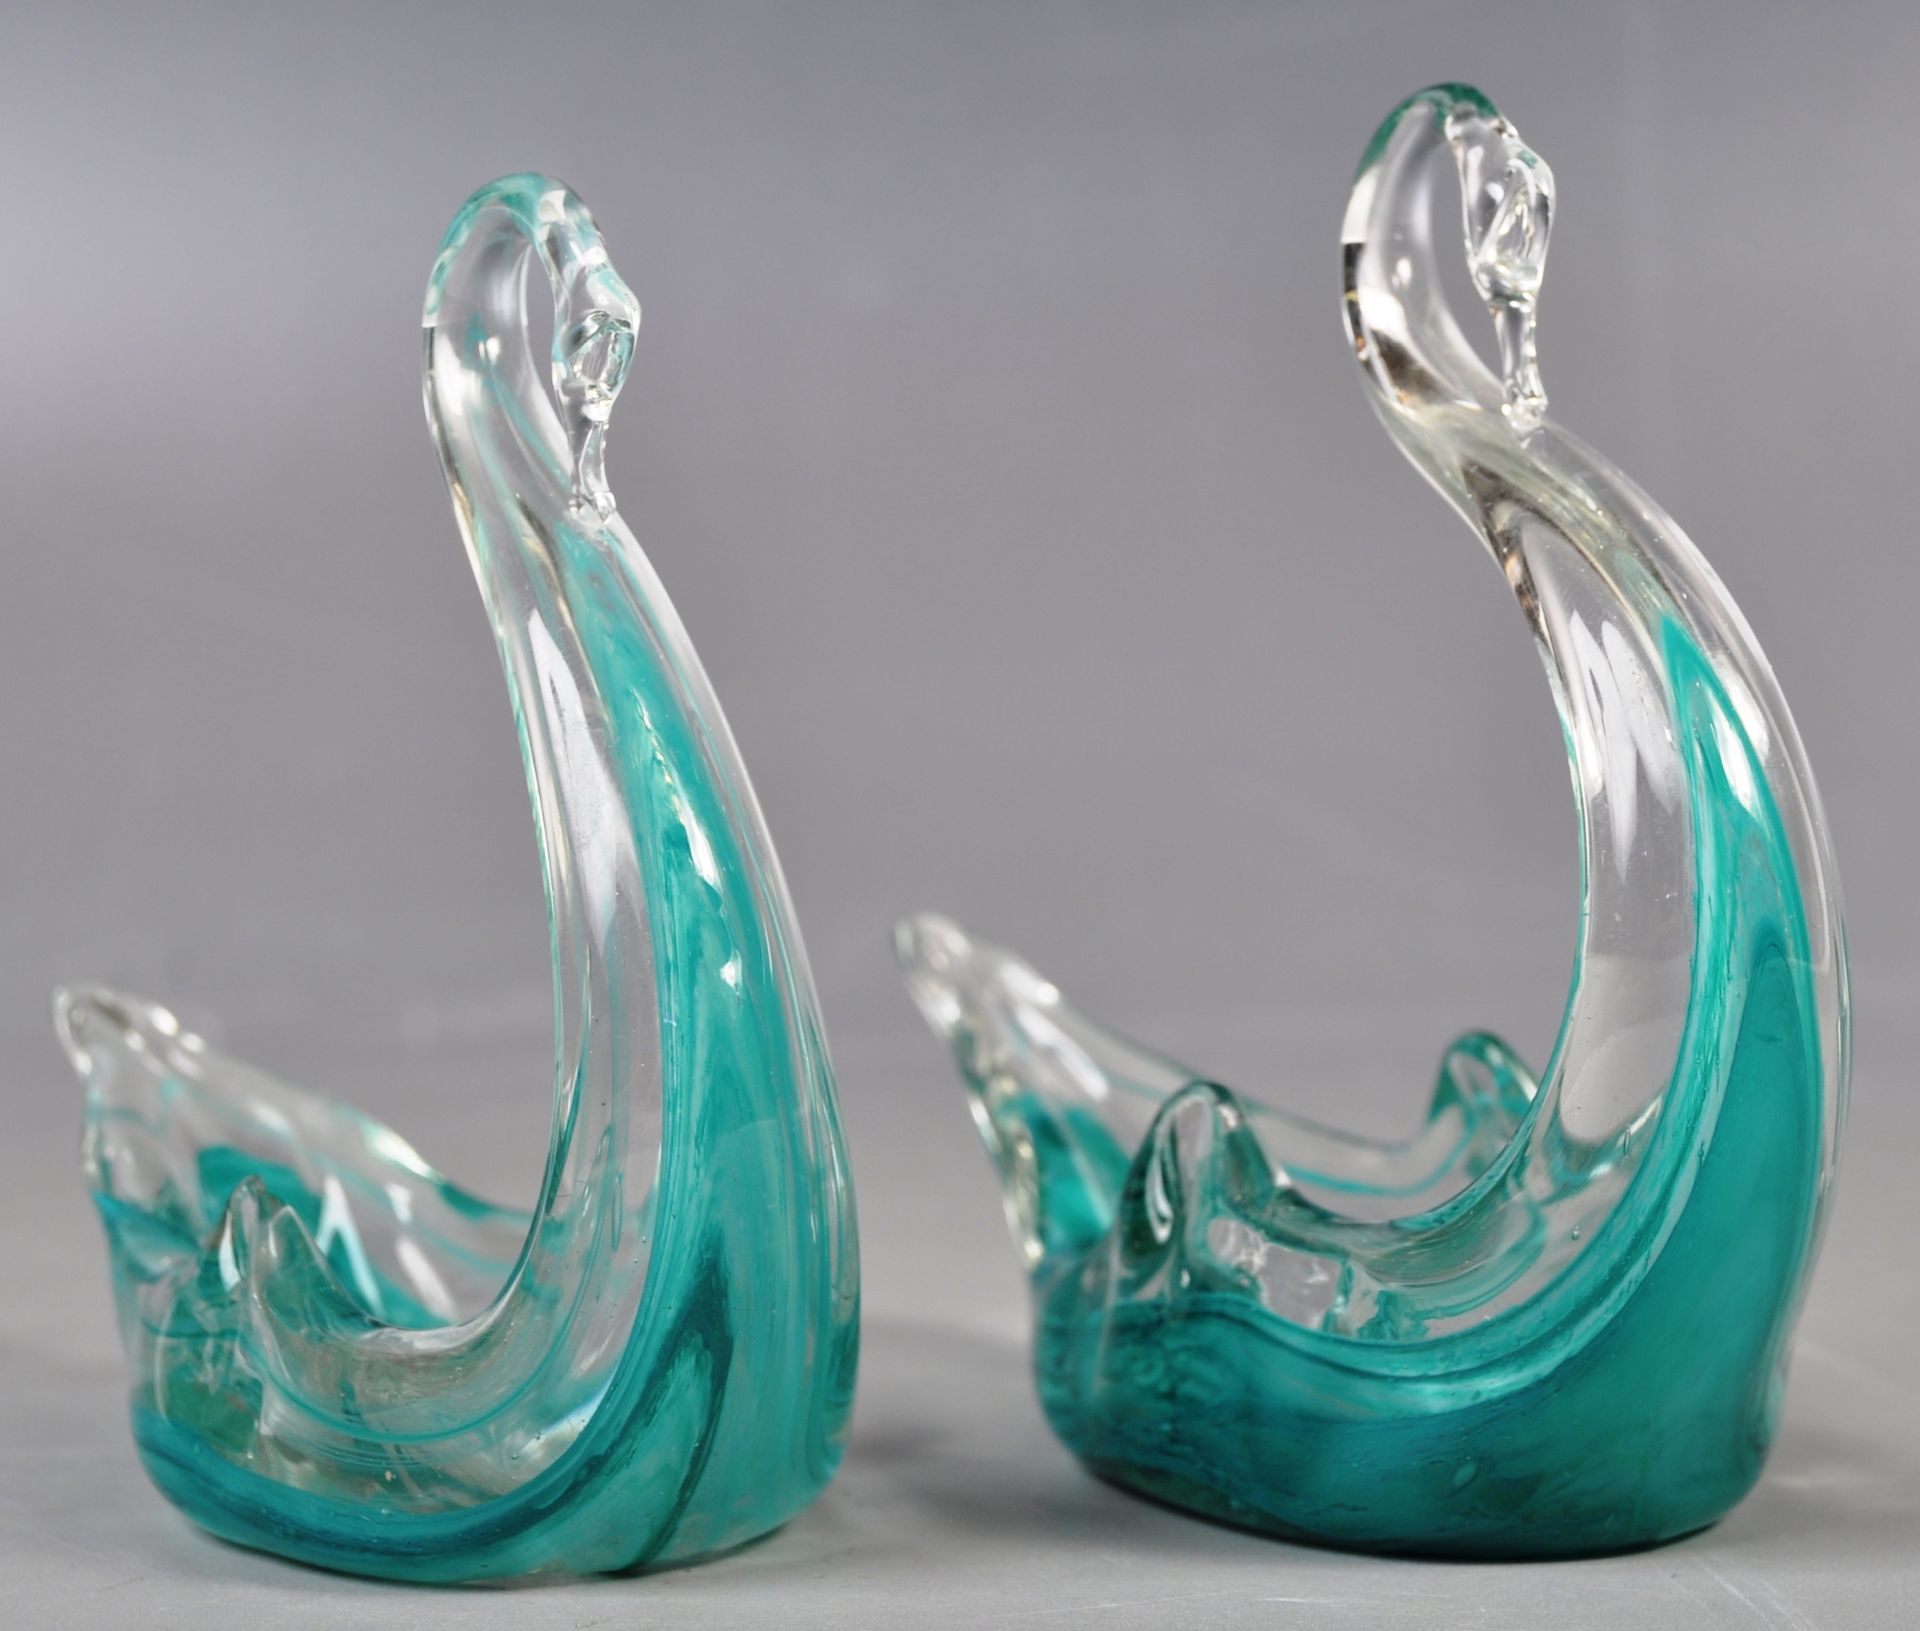 PAIR OF RETRO TURQUOISE GLASS TABLE SALTS / TRINKET DISHES IN THE FORMS OF SWANS